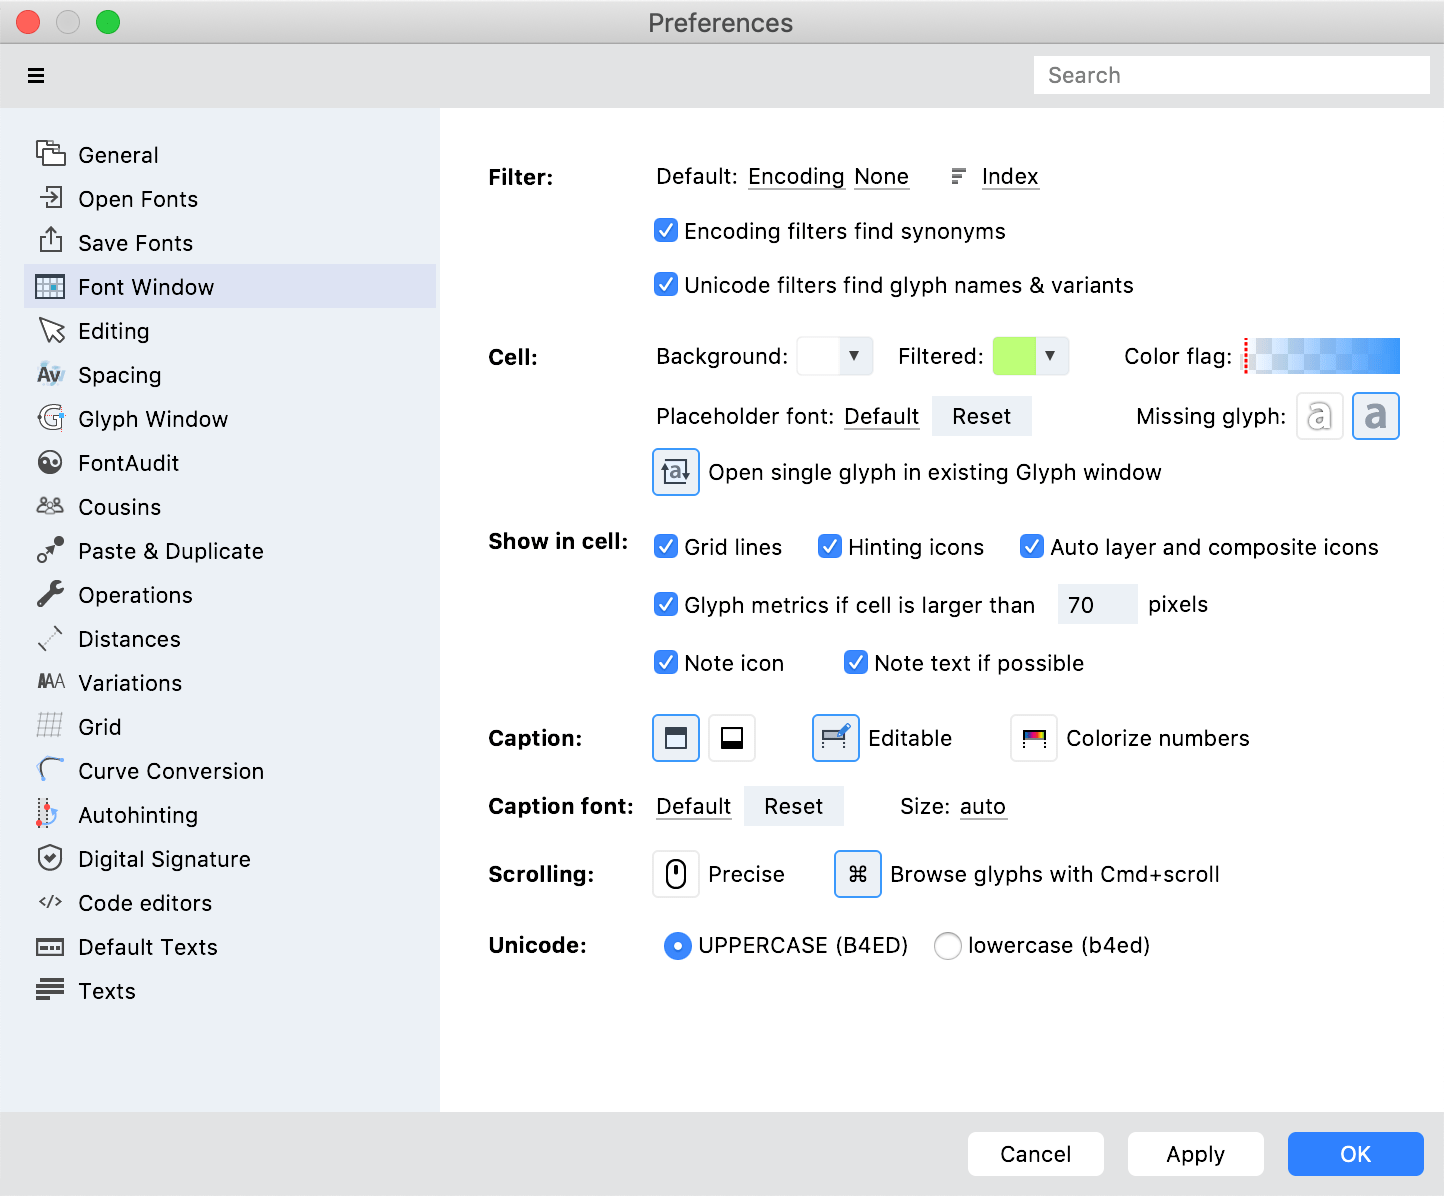 Redesigned preferences